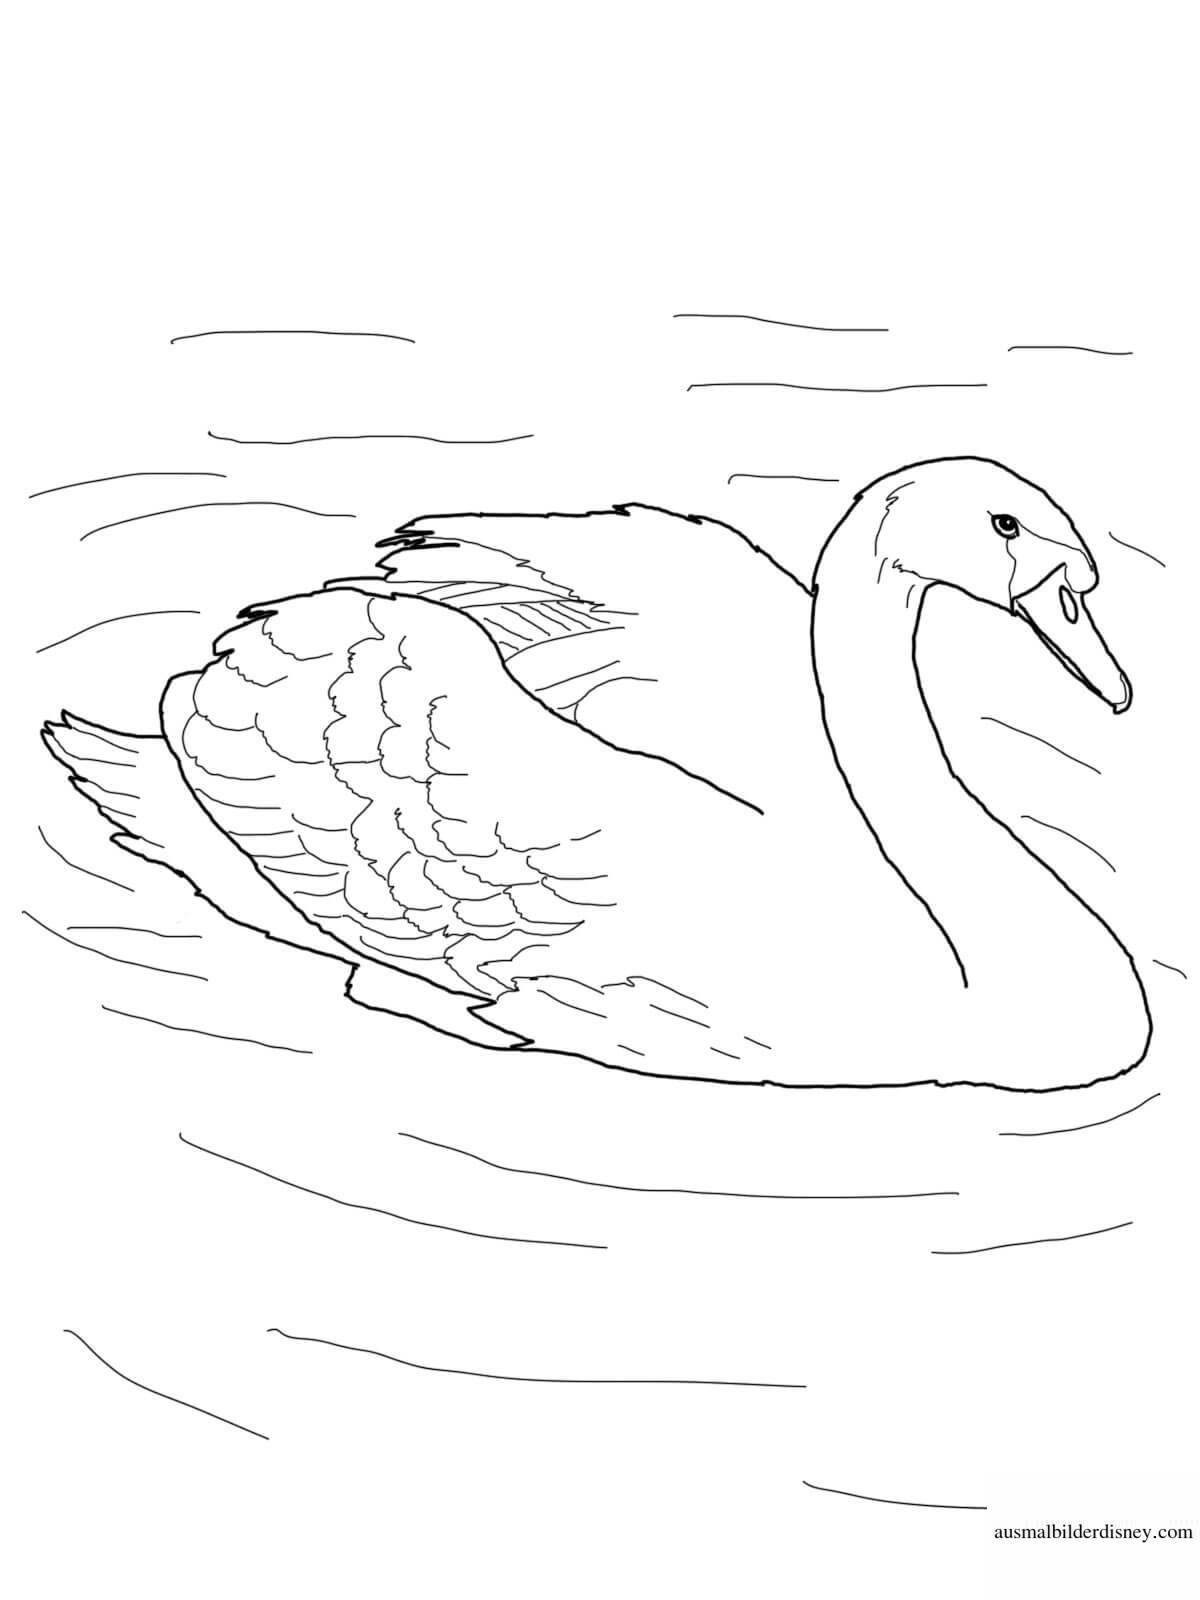 Swan lake coloring book for students